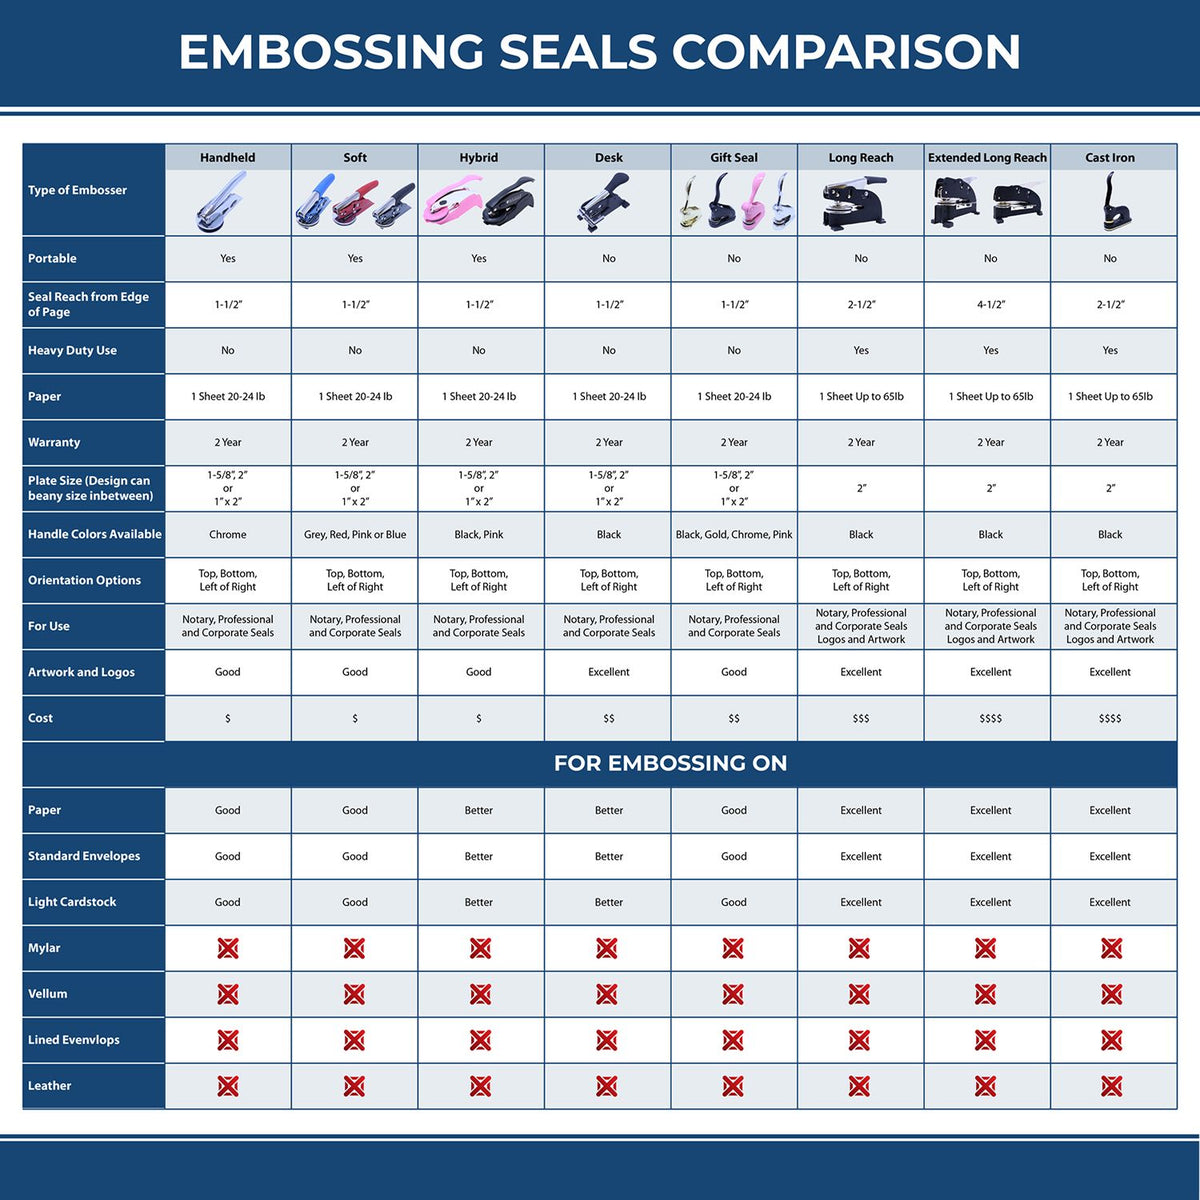 A comparison chart for the different types of mount models available for the Long Reach South Carolina PE Seal.